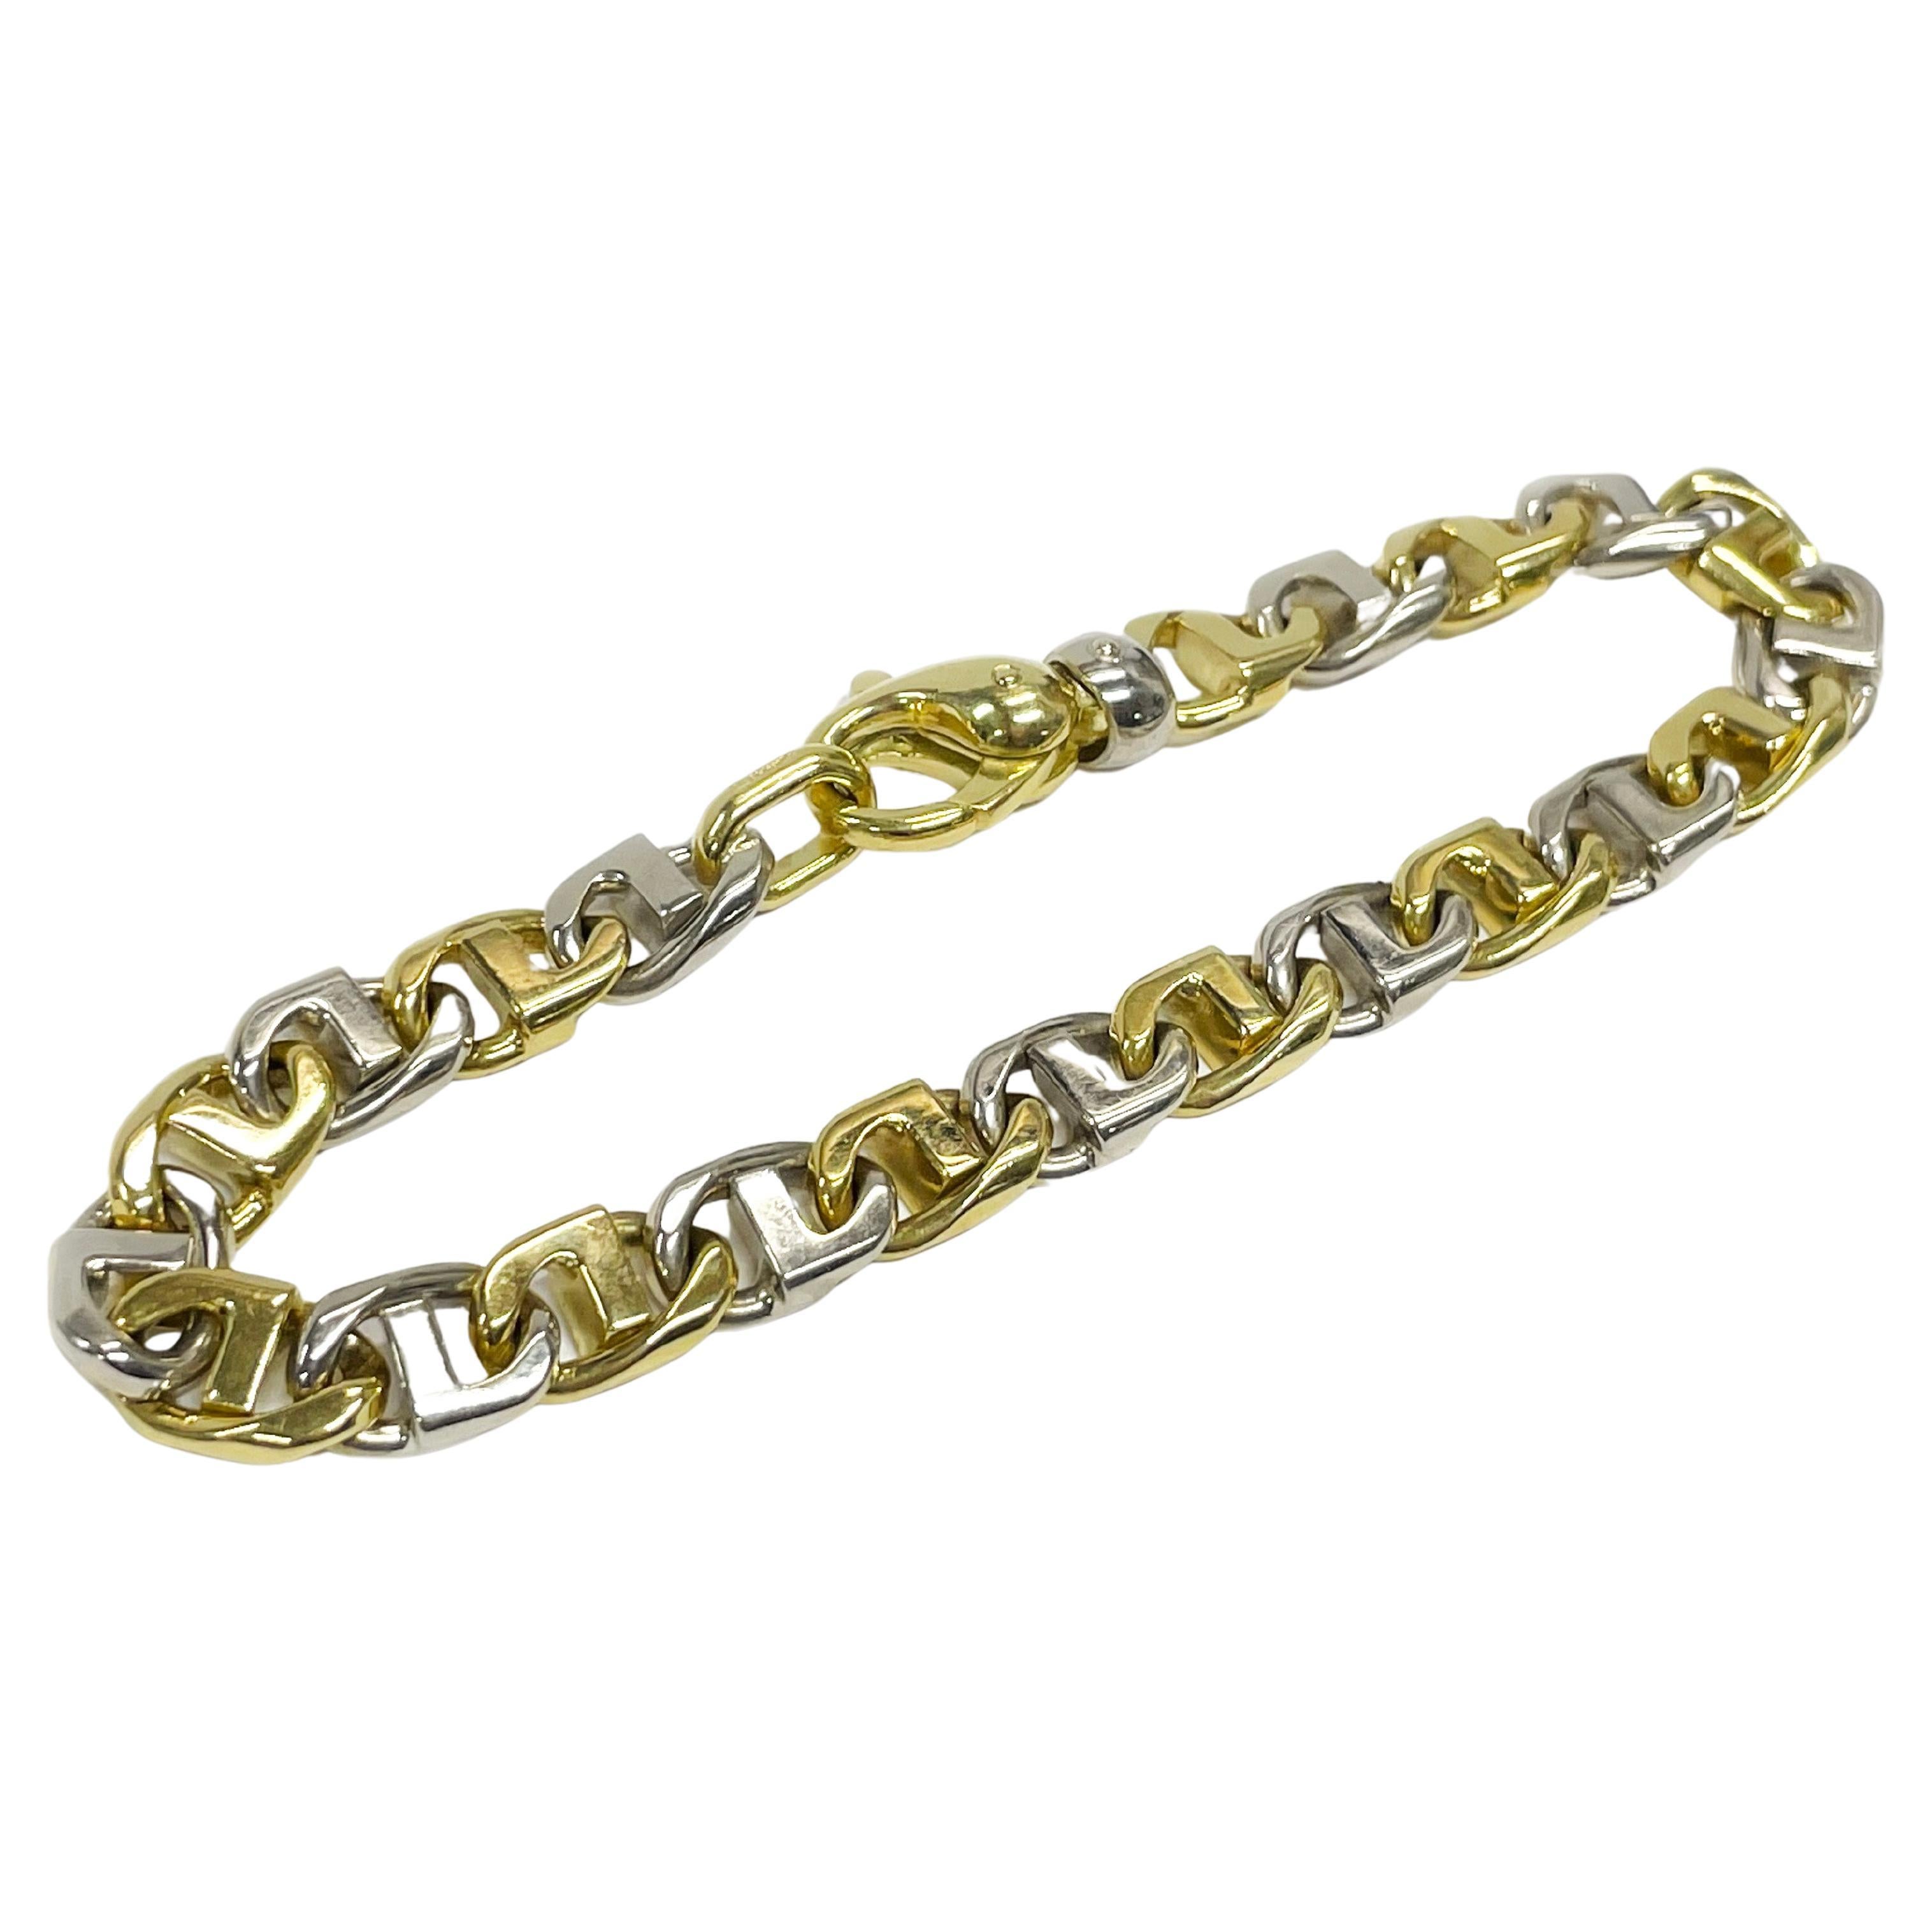 18 Karat Duo-Tone Fancy Link Bracelet. The bracelet features alternating white and yellow gold fancy links. Both the top and bottom of the bracelet links have a smooth shiny finish. The bracelet measures 8.5mm wide and is 8.75